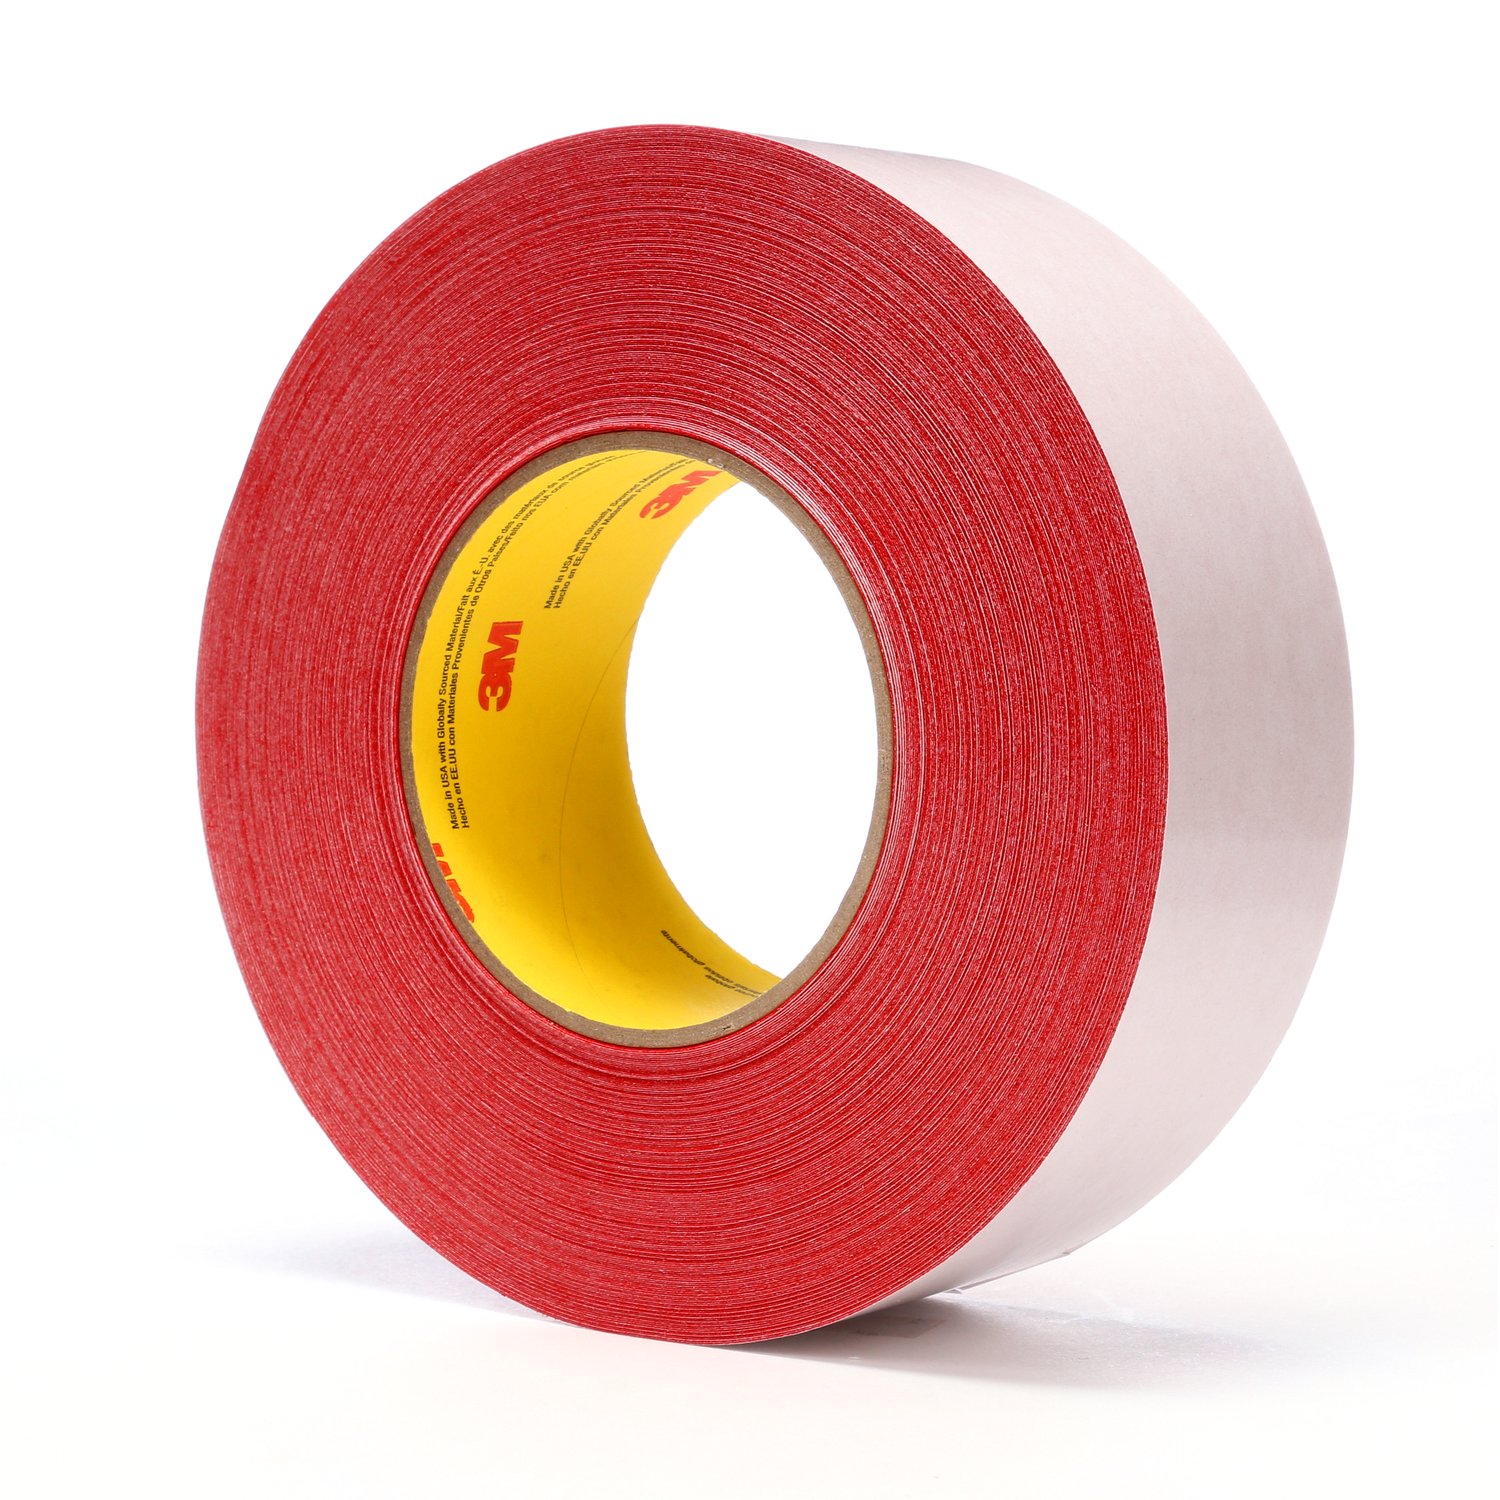 7000124673 - 3M Double Coated Tape 9741R, Red, 48 mm x 55 m, 6.5 mil, 24 rolls per
case